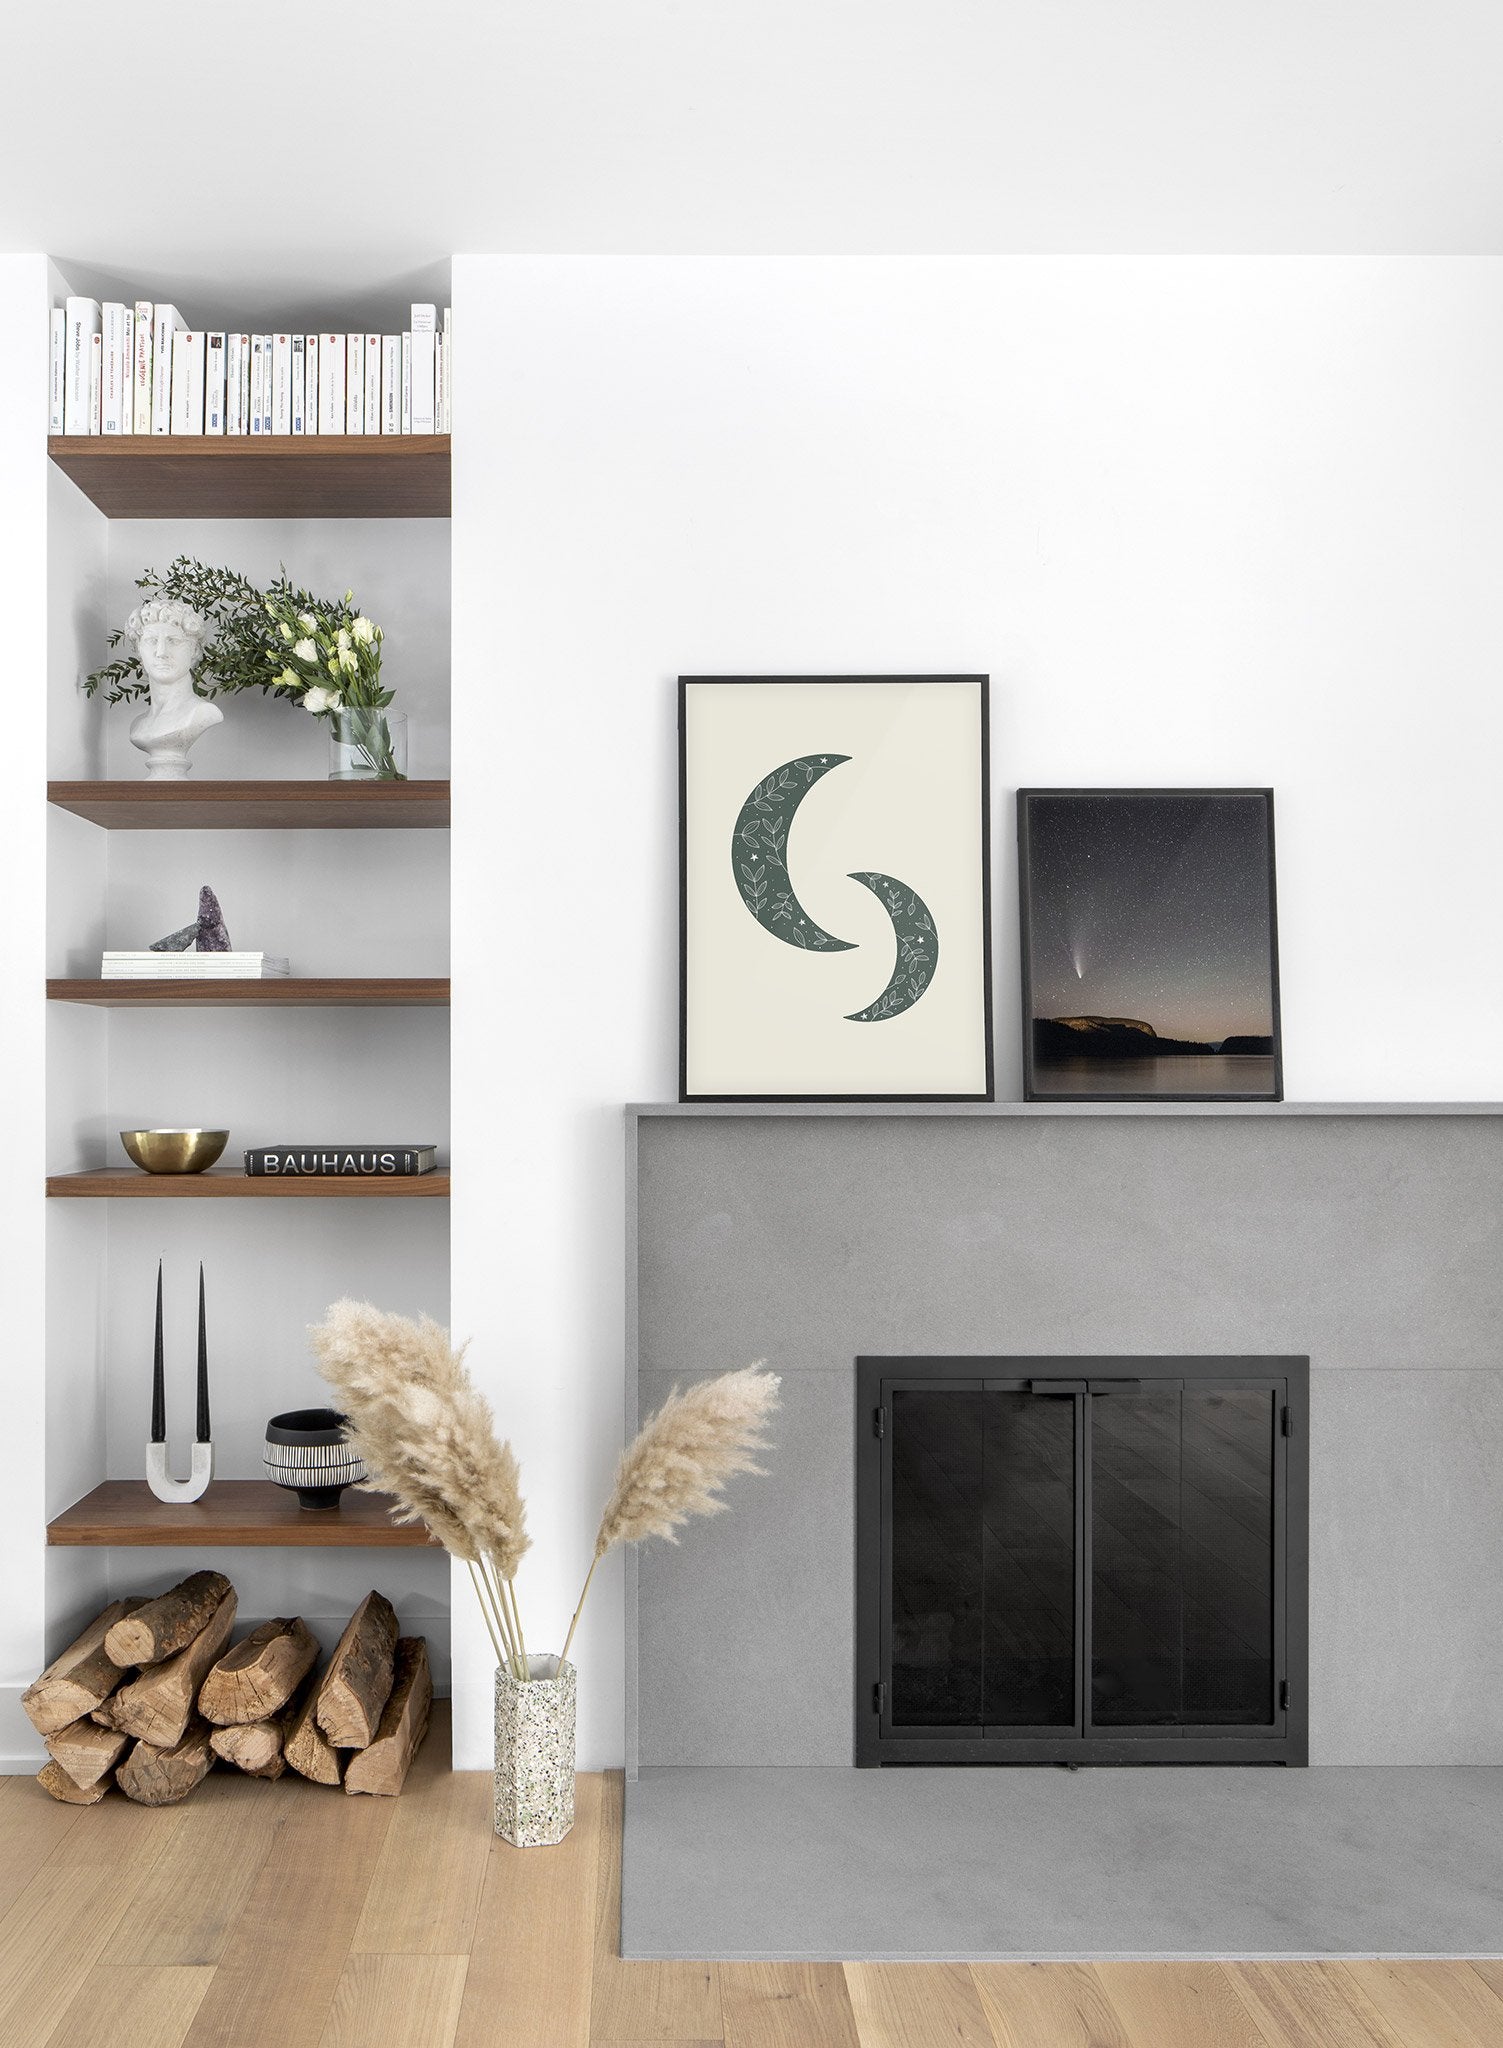 Celestial illustration poster by Opposite Wall with green Floral Moon - Lifestyle Duo - Living Room